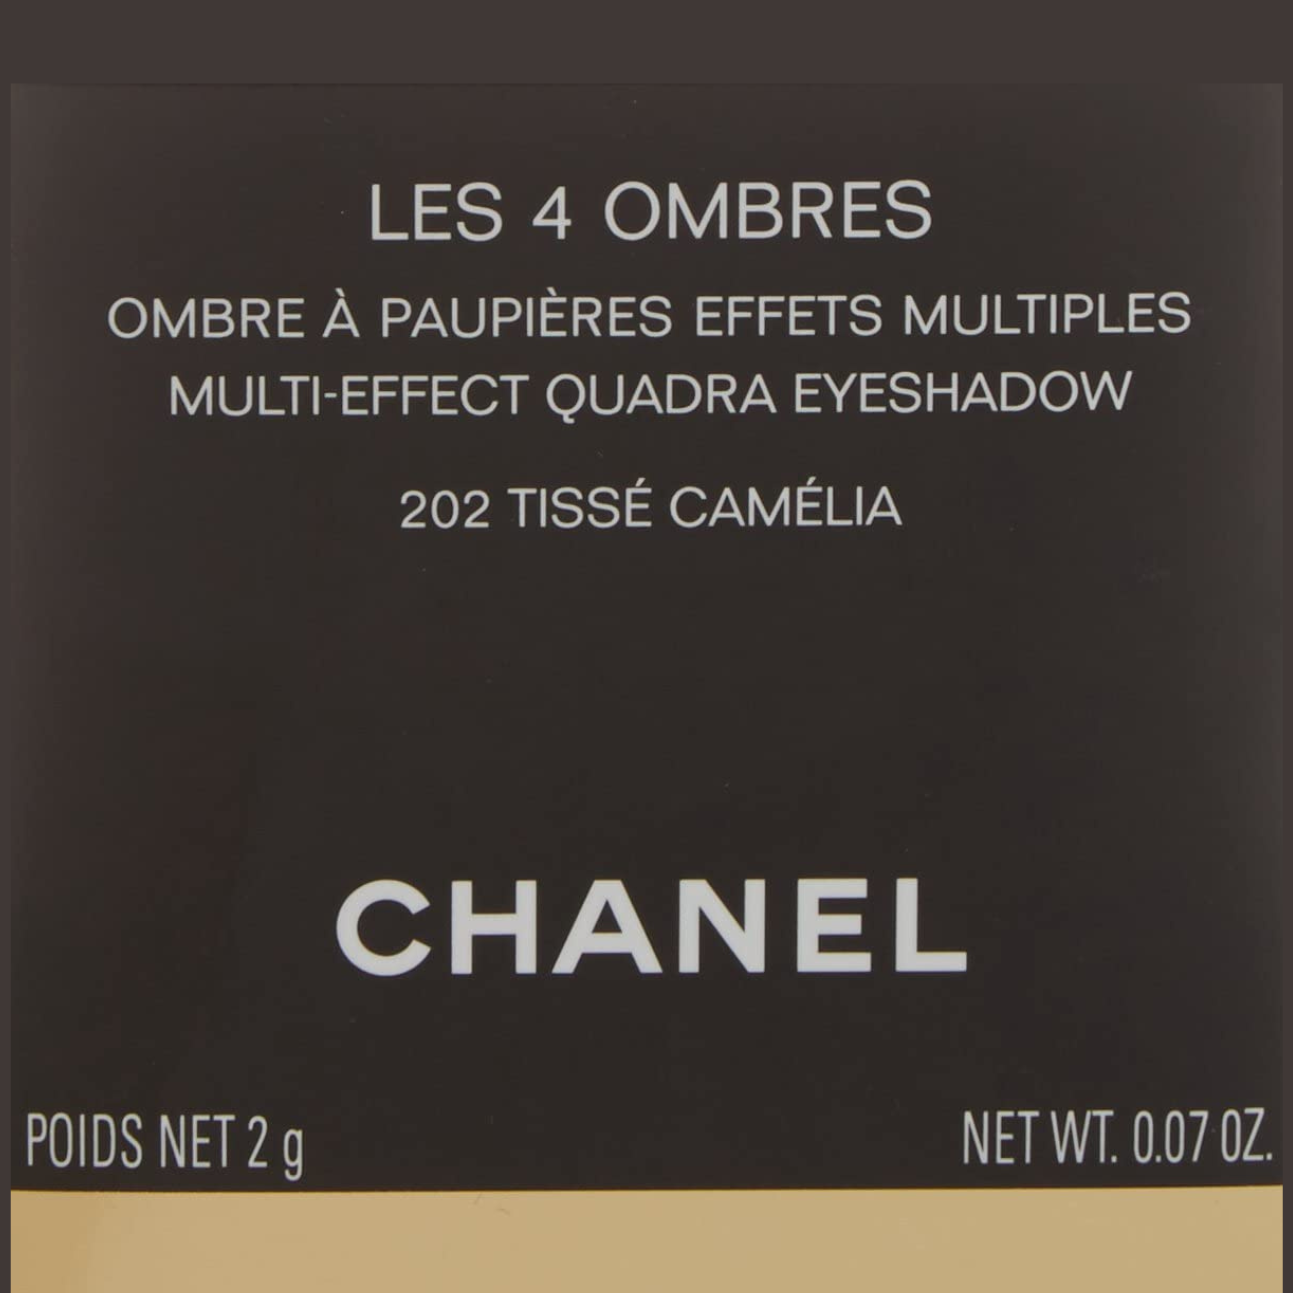 Chanel Tisse Camelia (202) Les 4 Ombres Multi-Effect Quadra Eyeshadow  Review & Swatches